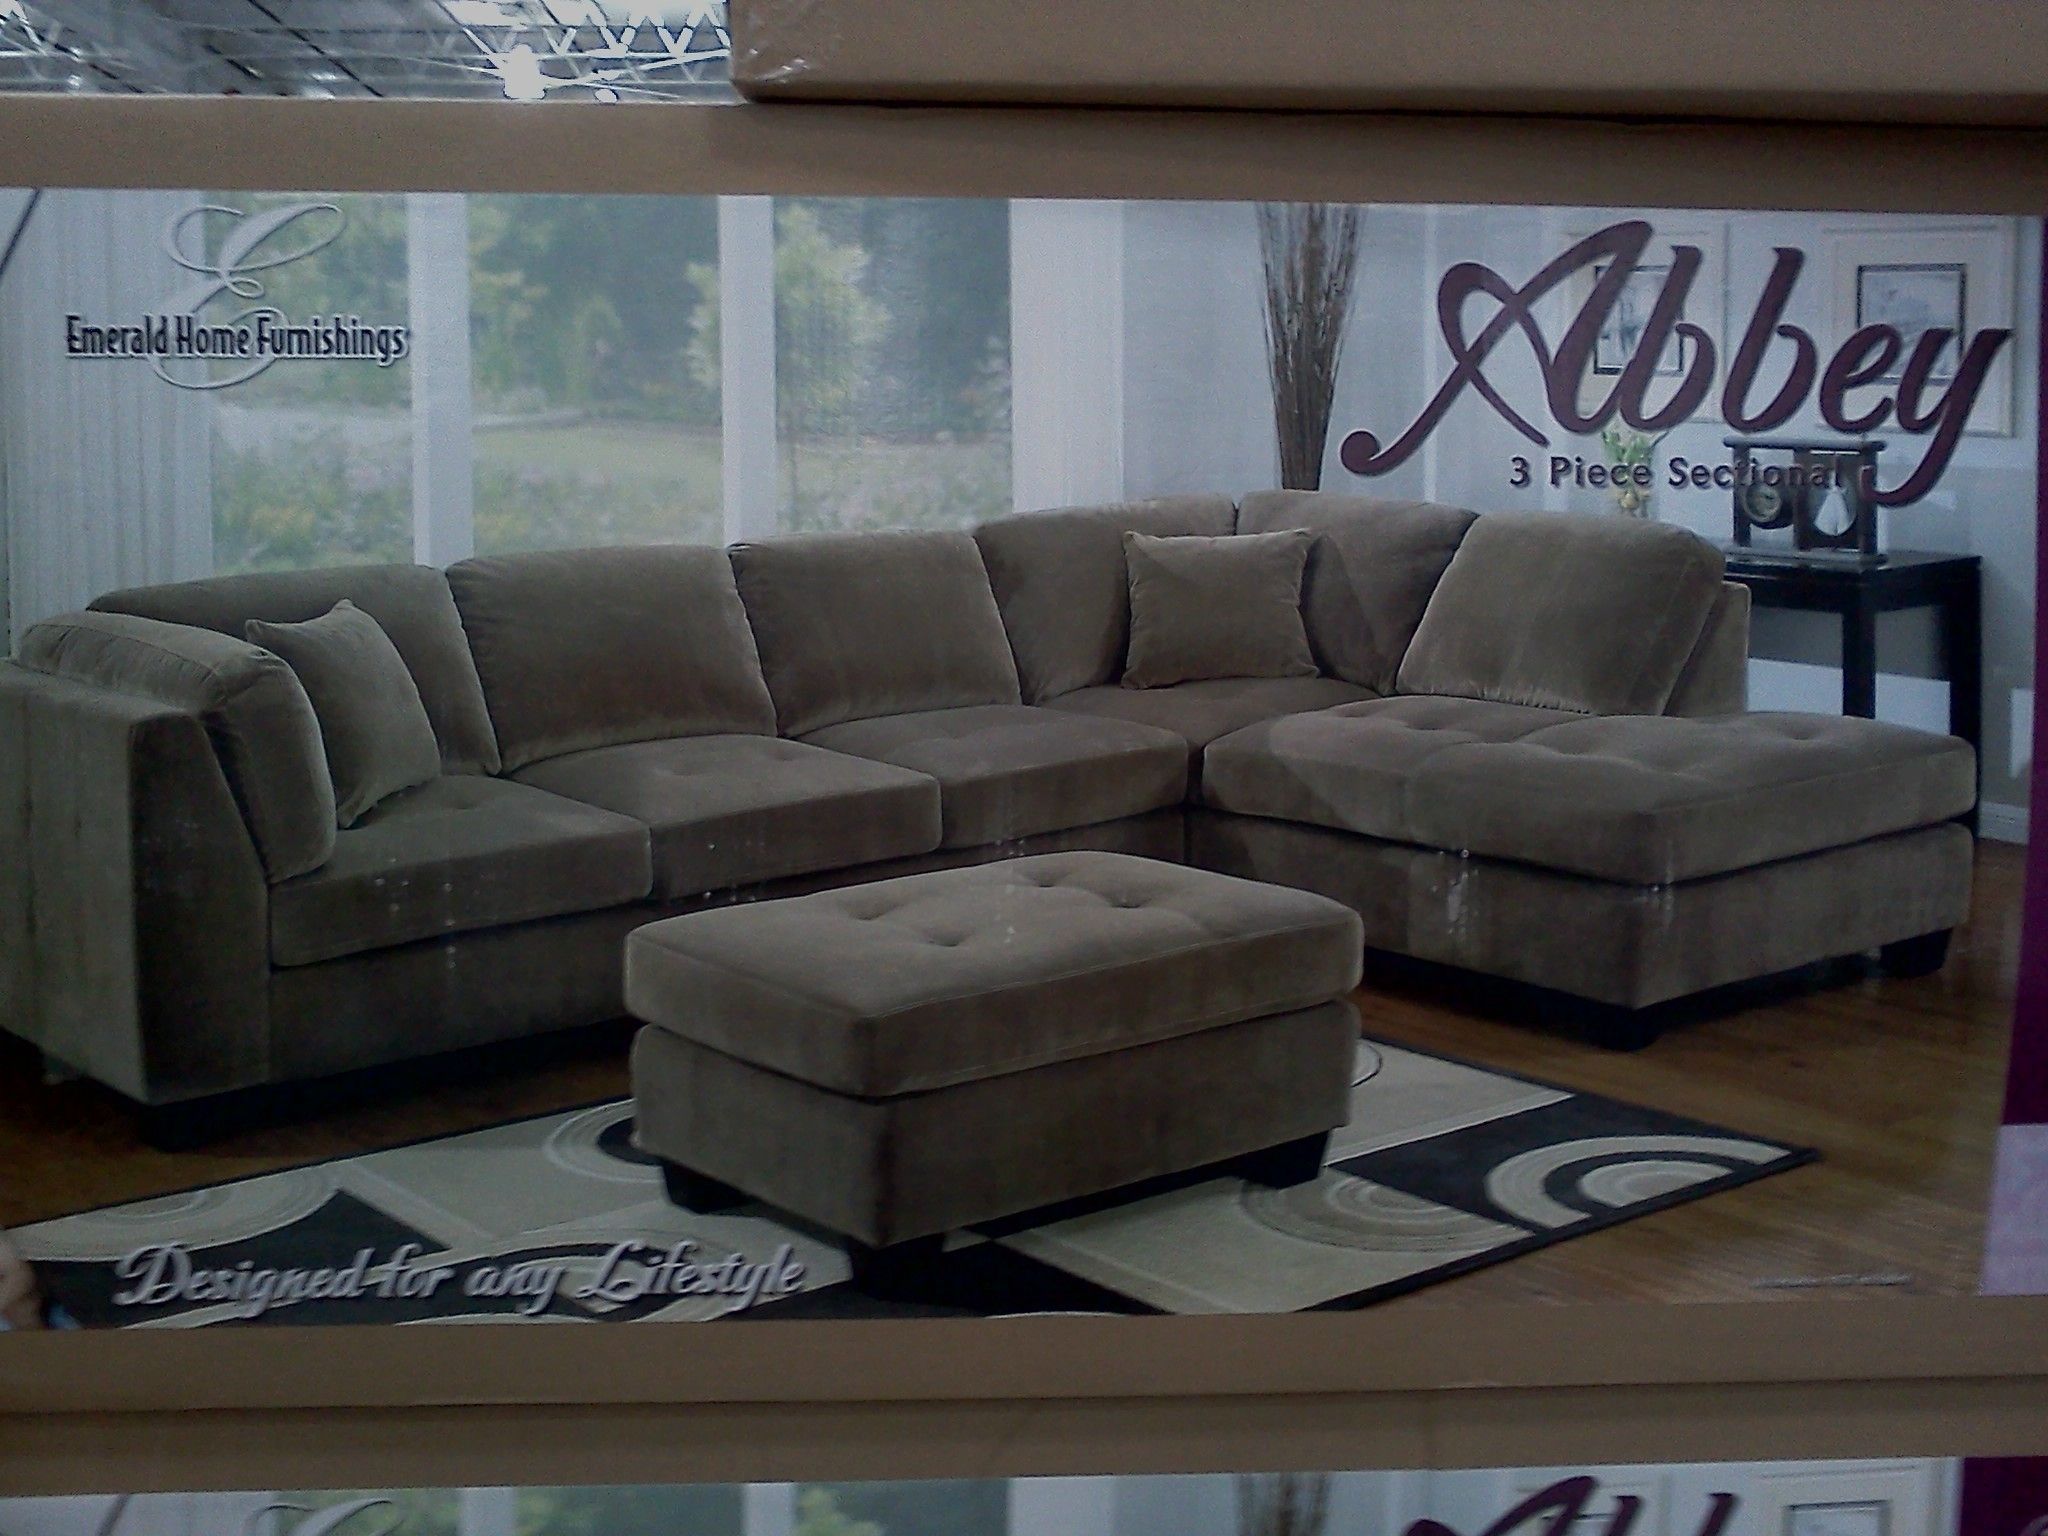 Costco Emerald Home Modular Sectional Slickdeals – Kaf Mobile Homes Pertaining To Home Furniture Sectional Sofas (View 1 of 10)